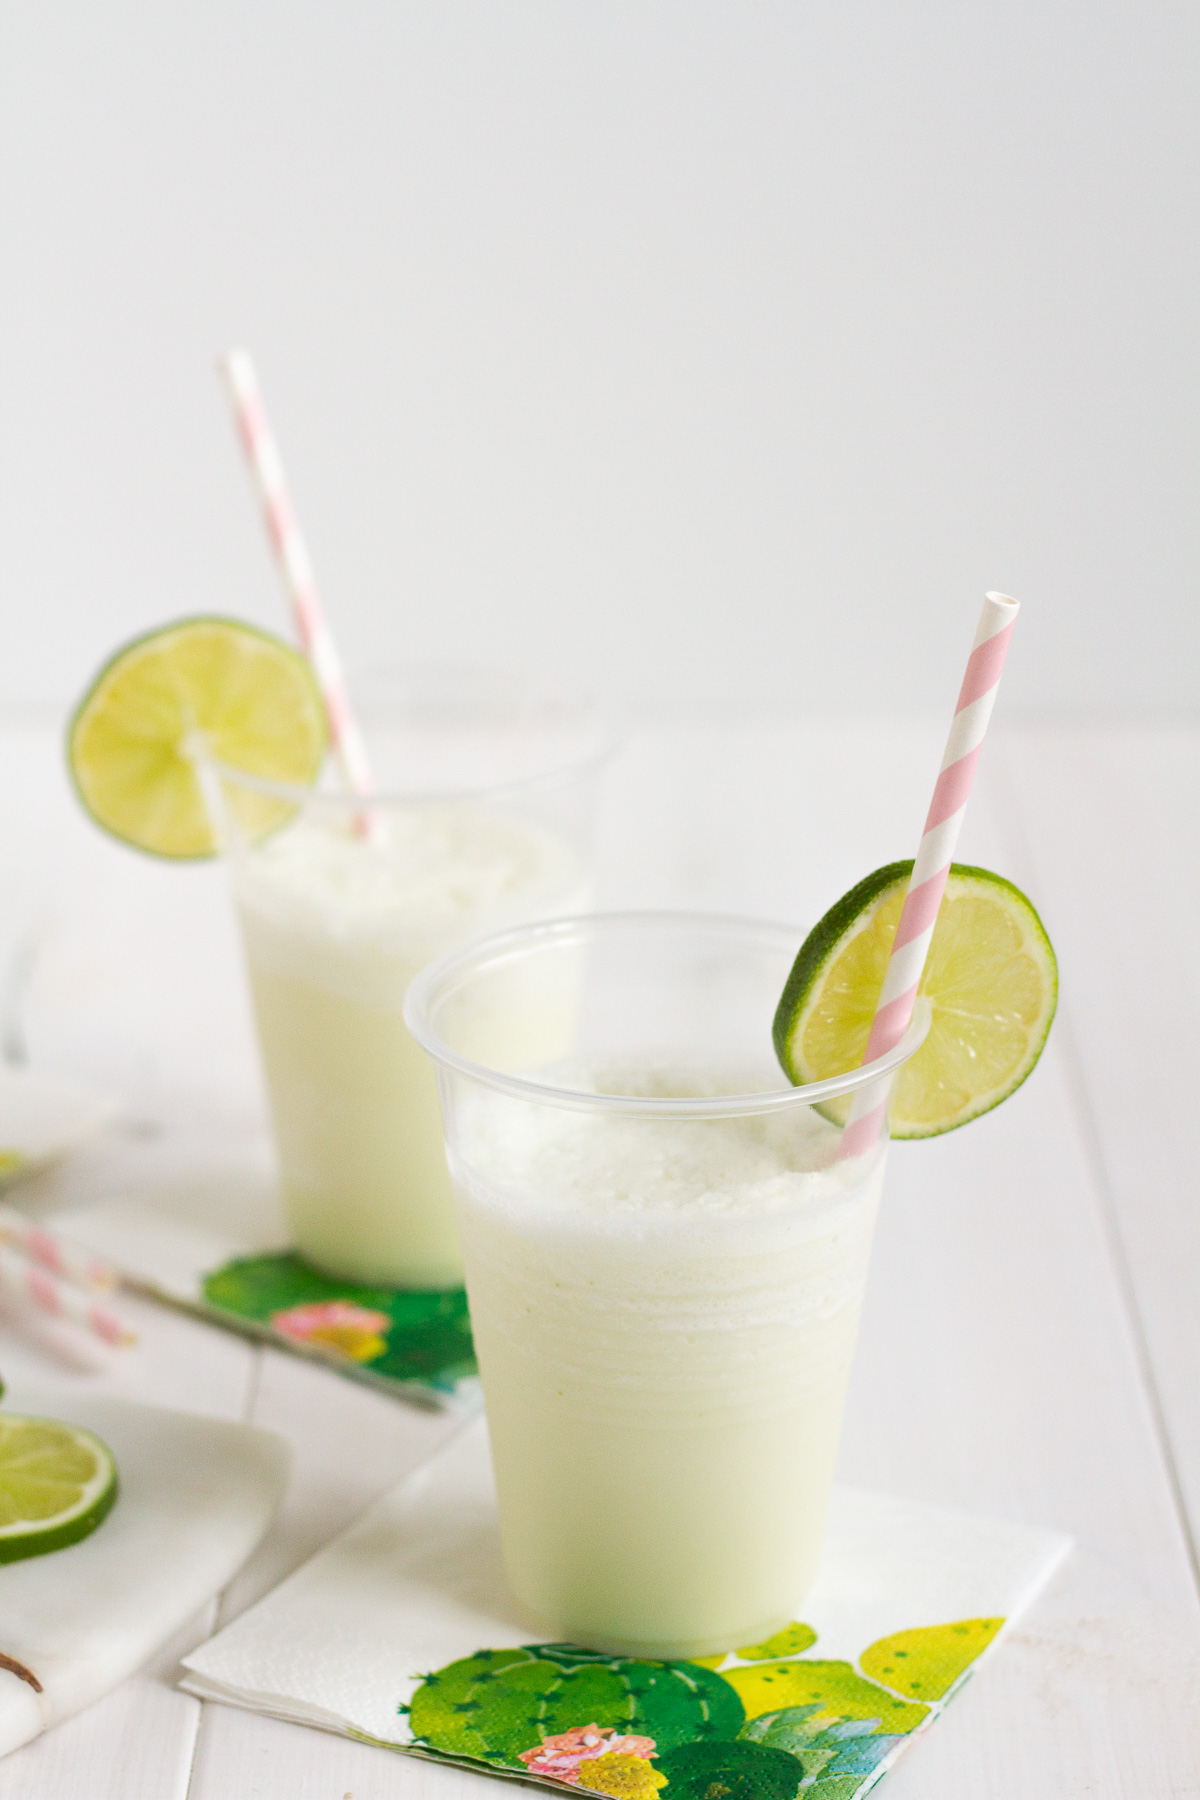 This refreshing limeade is the perfect mix of creamy and frosty, and a sure way to beat the heat this summer!